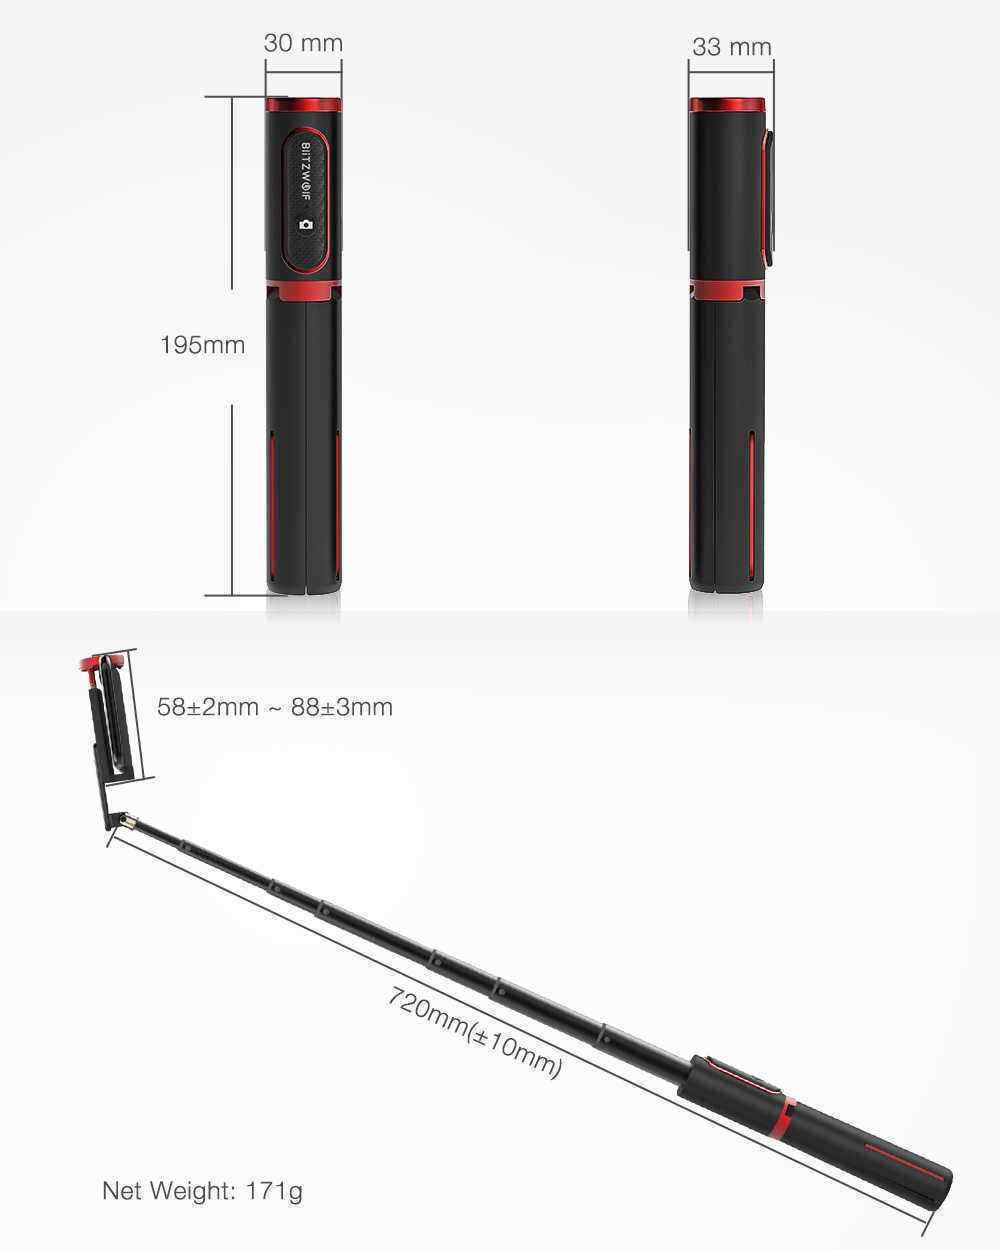 BlitzWolfreg-BW-BS10-All-In-One-Portable-bluetooth-Selfie-Stick-Hidden-Phone-Clamp-with-Retractable--1515460